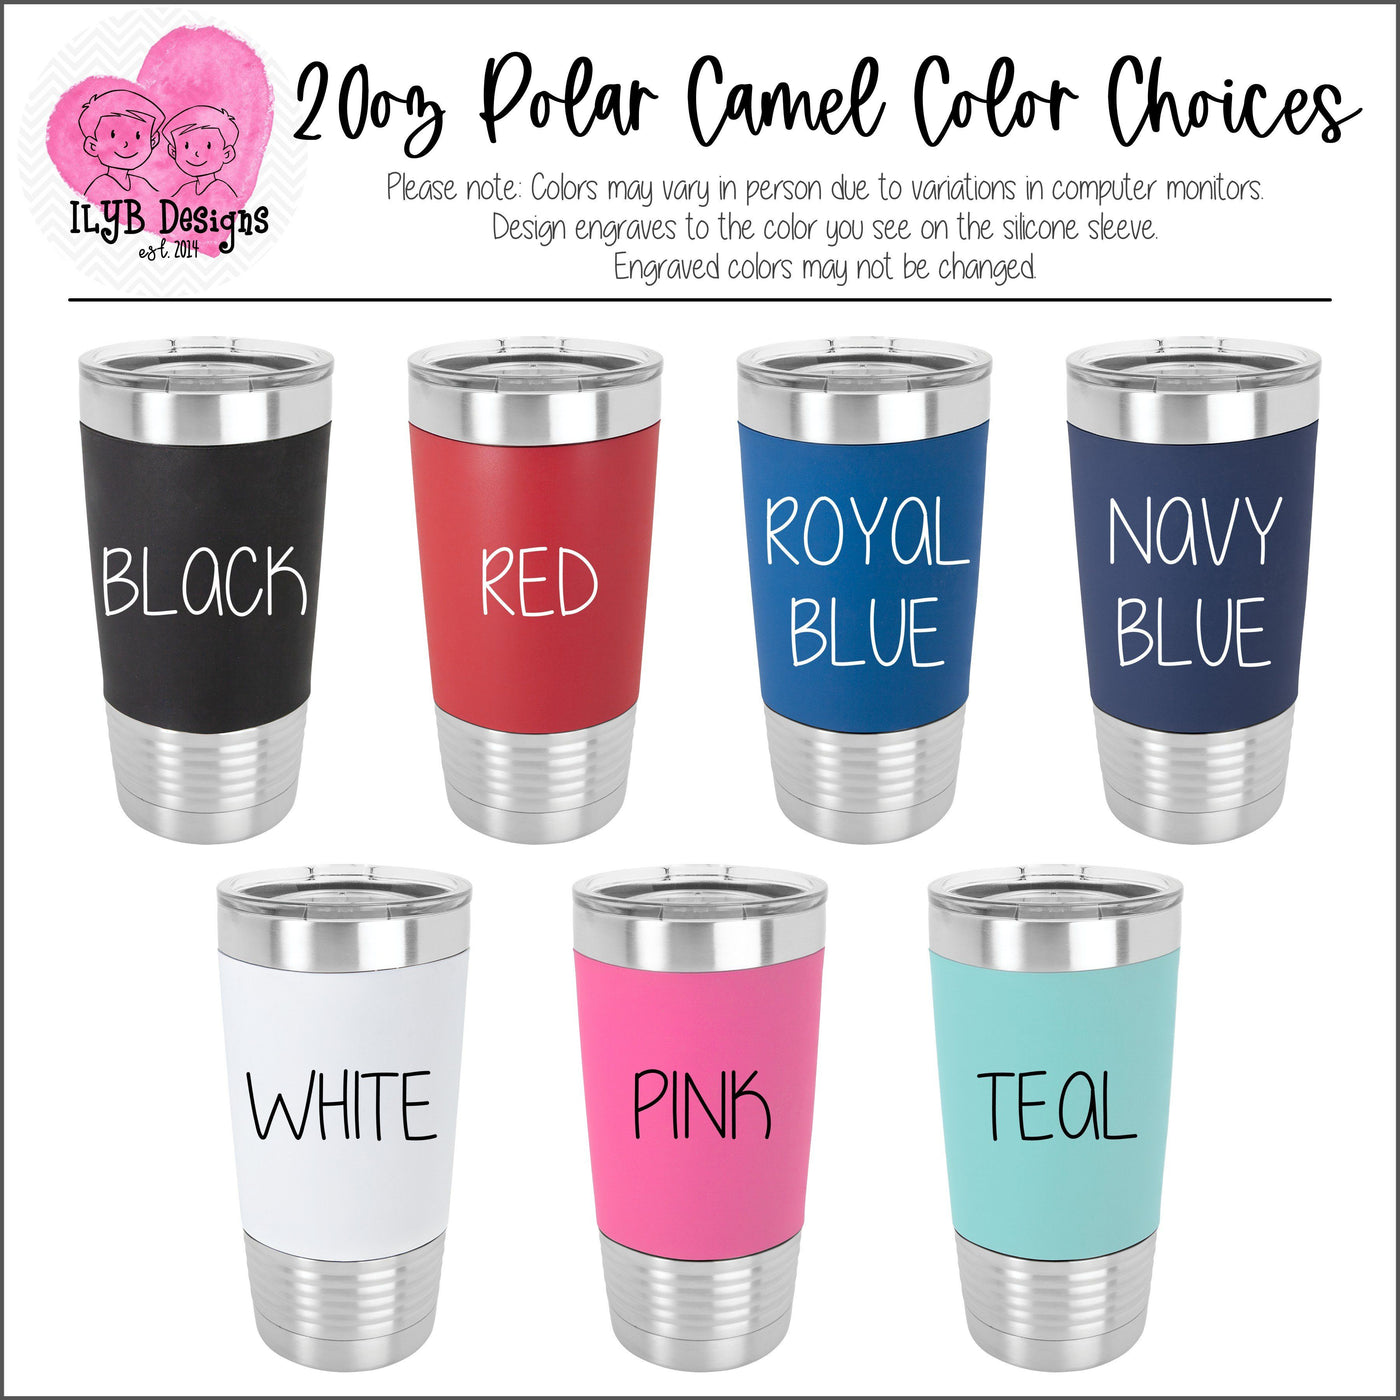 20oz Polar Camel Stainless Steel Tumbler Color choices. Colors include black, red, royal blue, navy blue, white, pink, and teal.